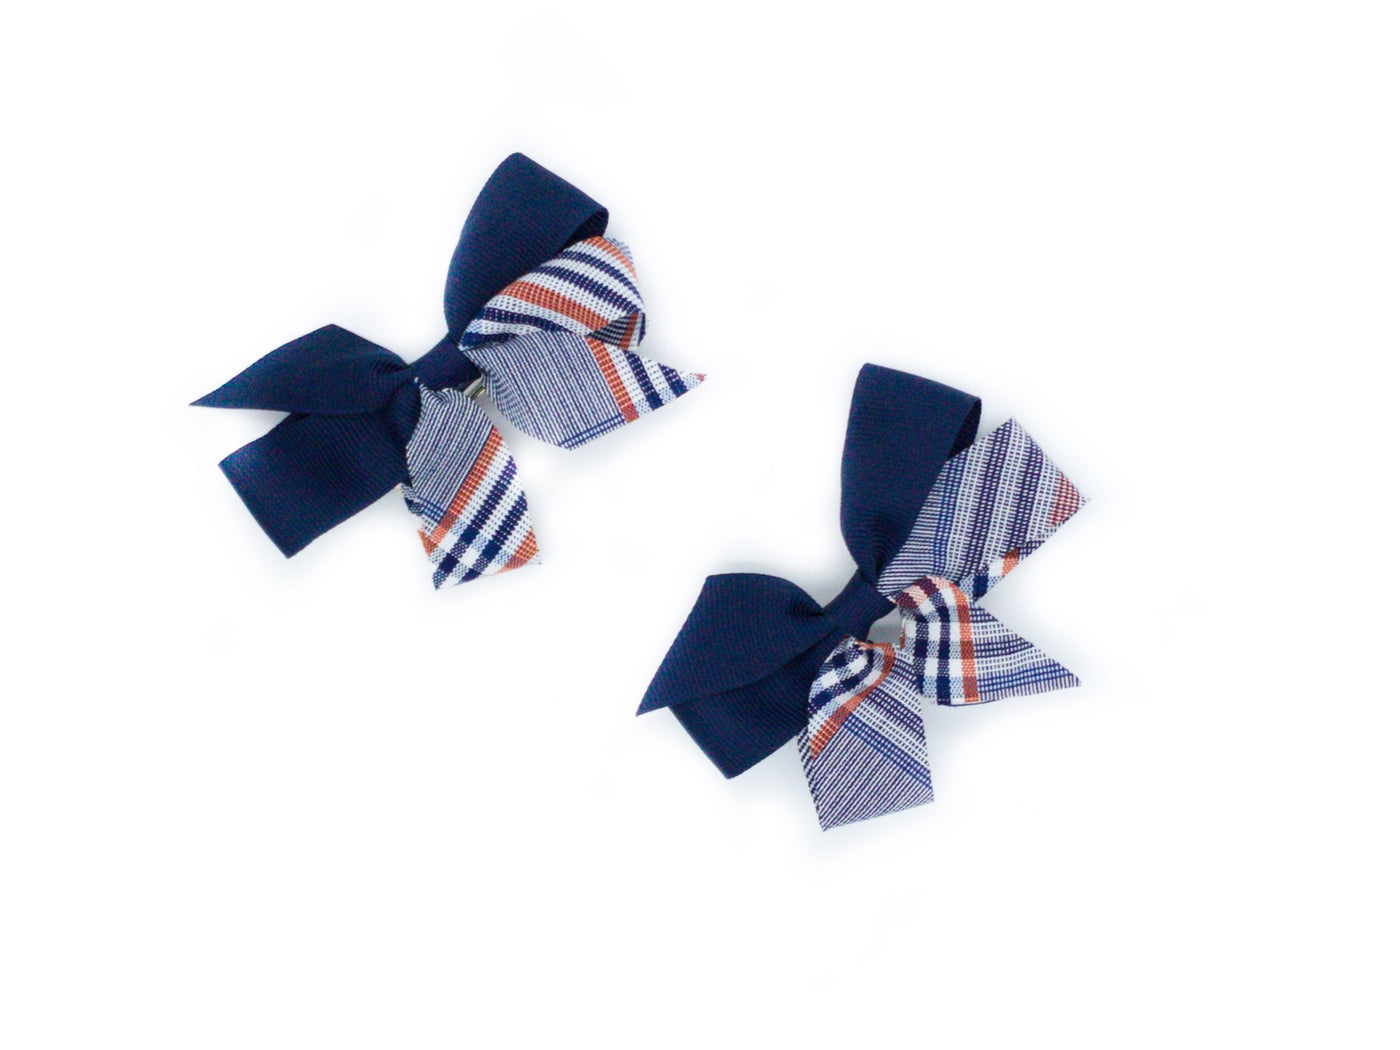 NCS bows and accessories